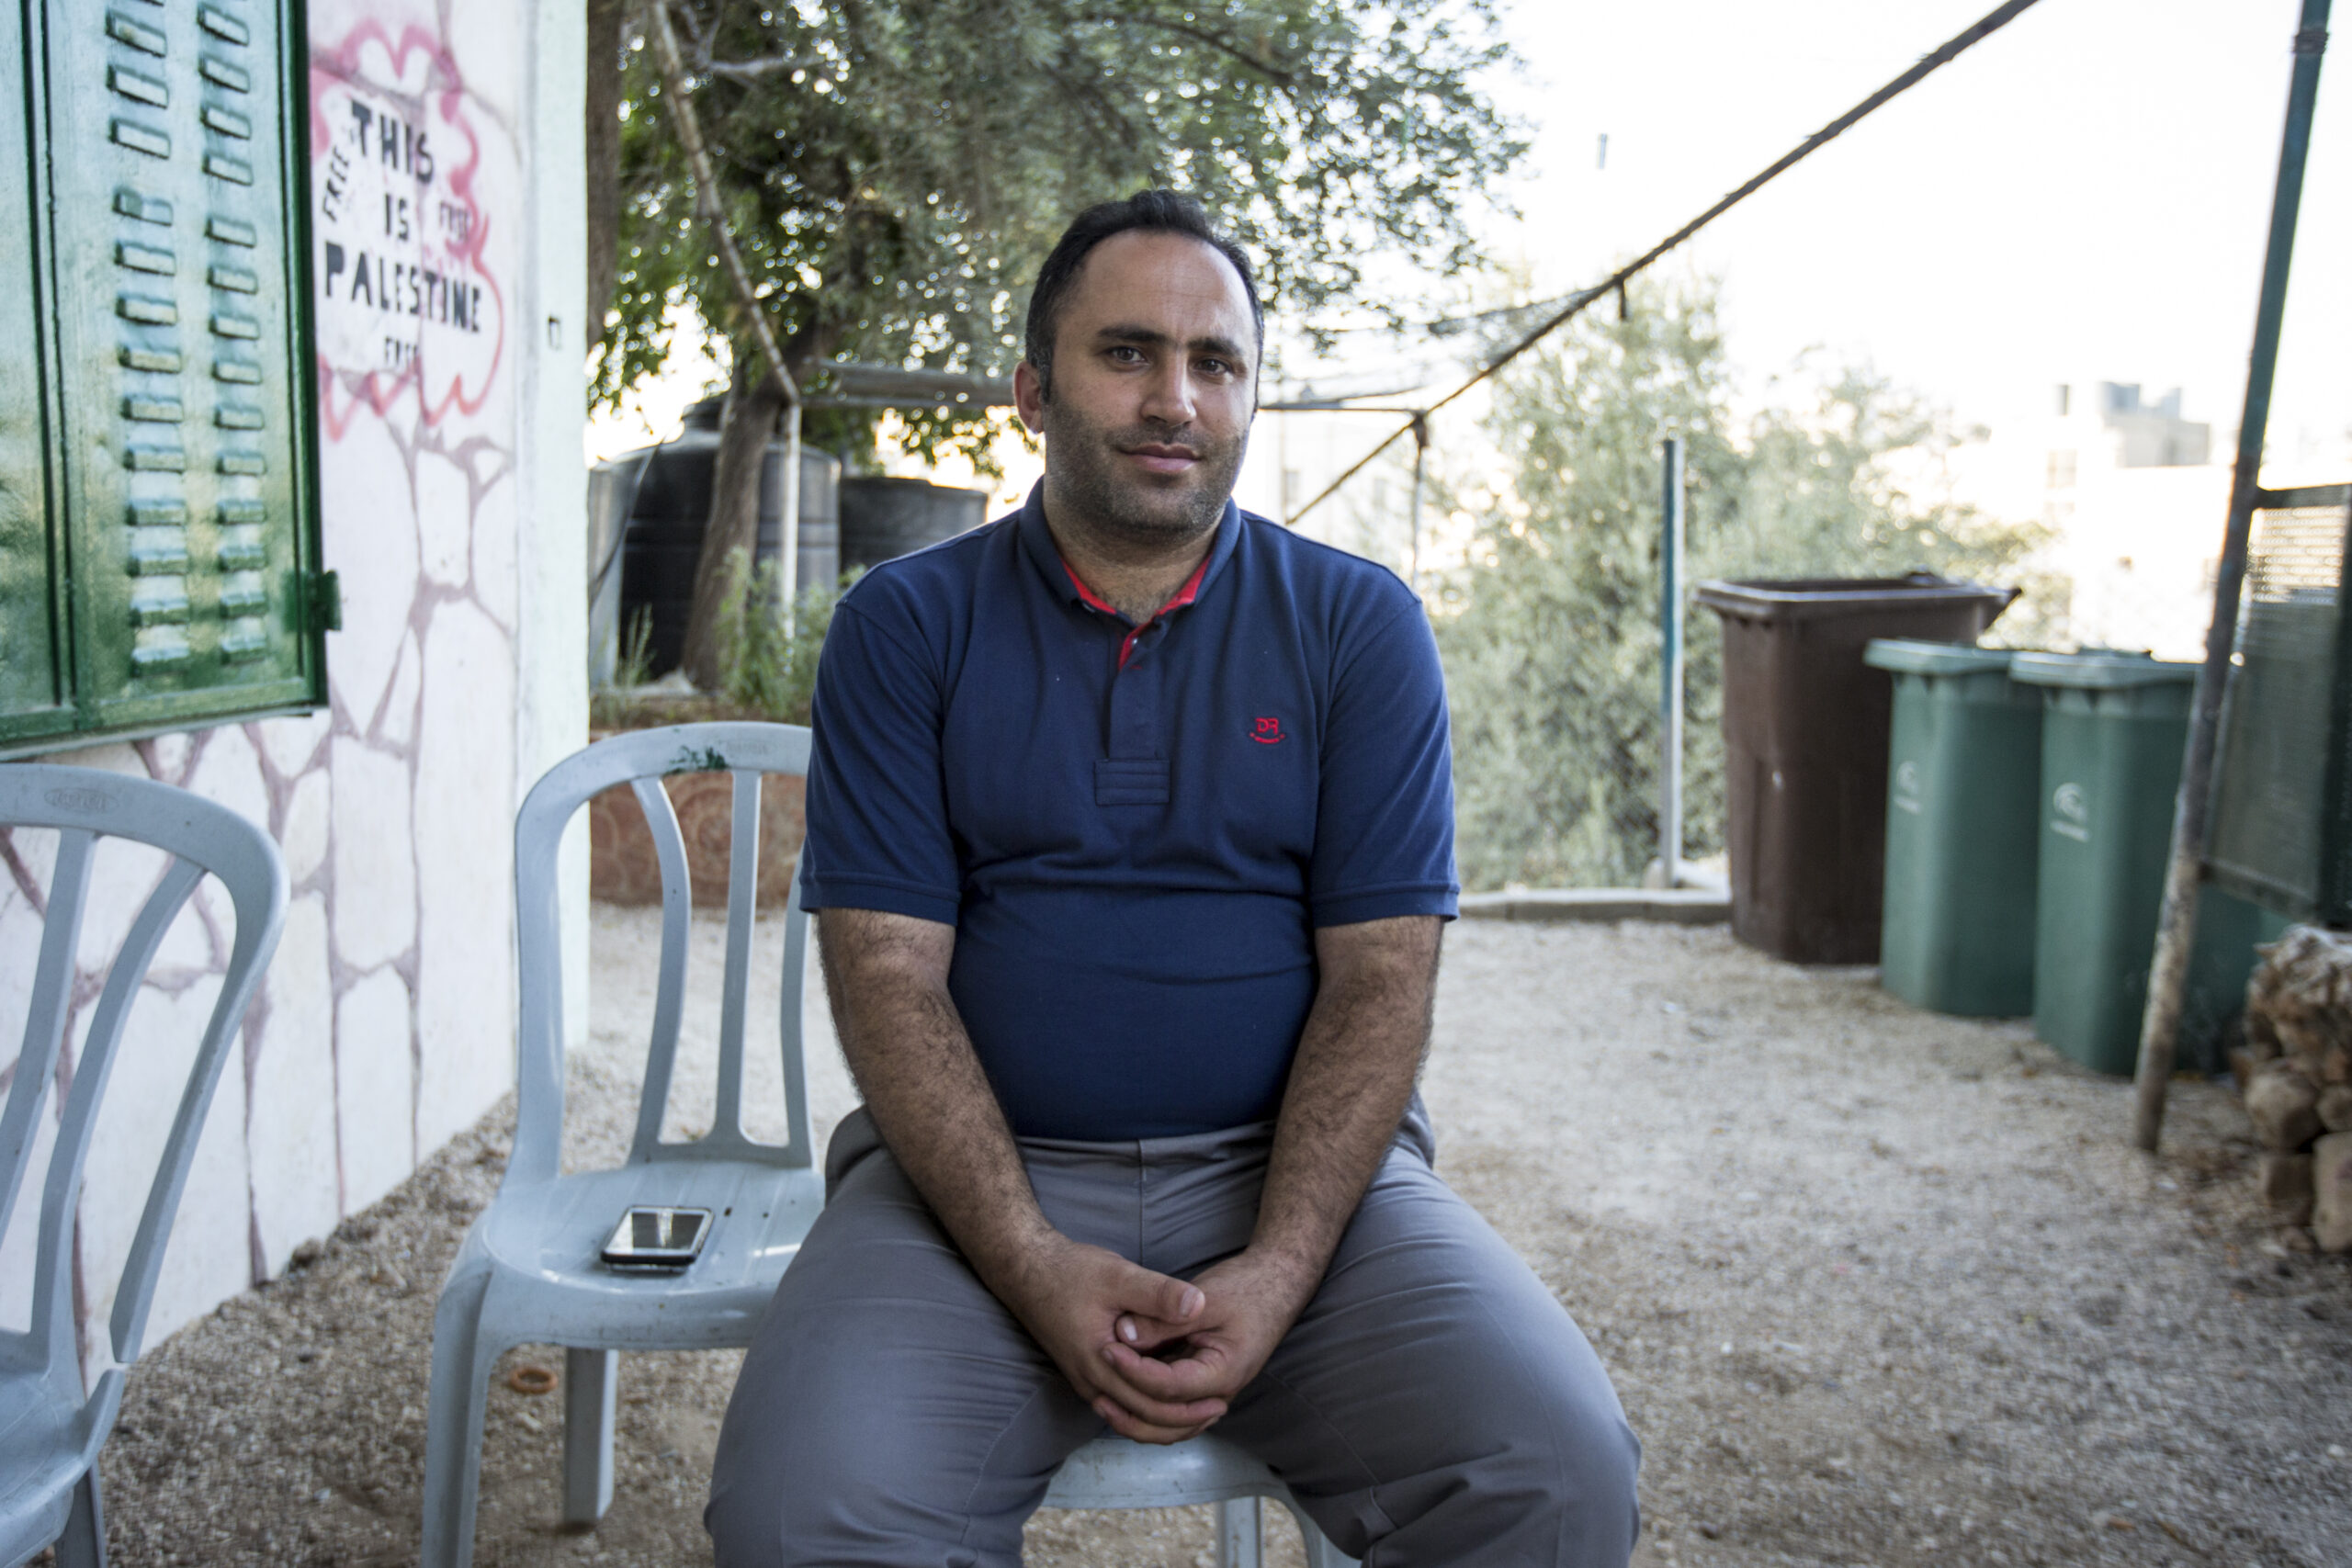 Israel/OPT: Drop politically motivated charges against Palestinian activist Issa Amro